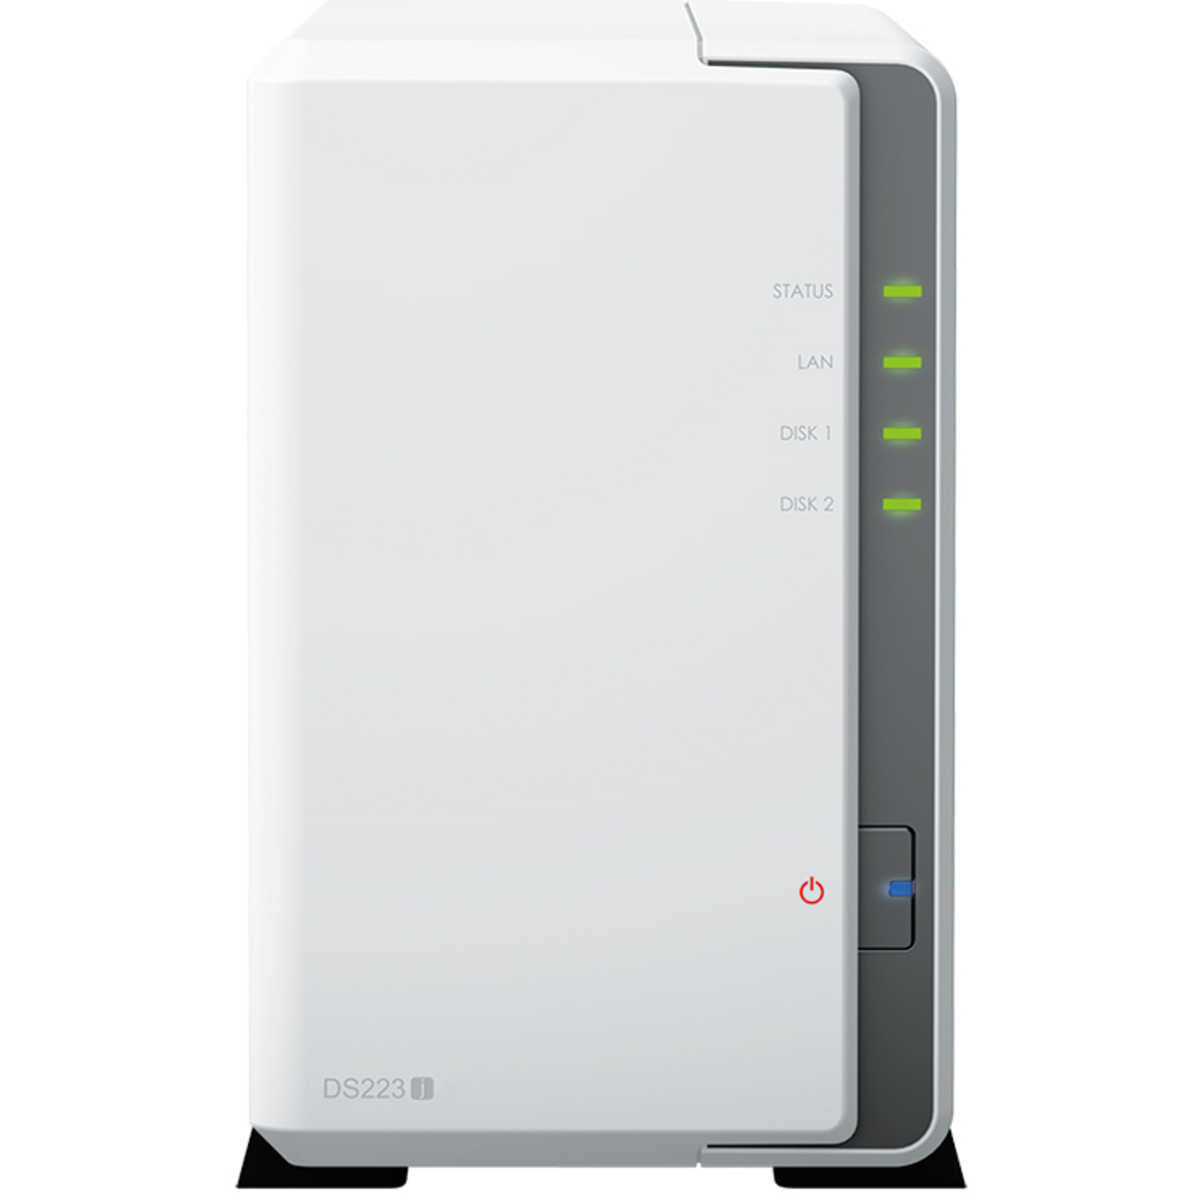 Synology DiskStation DS223j 2tb 2-Bay Desktop Personal / Basic Home / Small Office NAS - Network Attached Storage Device 1x2tb Seagate BarraCuda ST2000DM008 3.5 7200rpm SATA 6Gb/s HDD CONSUMER Class Drives Installed - Burn-In Tested DiskStation DS223j